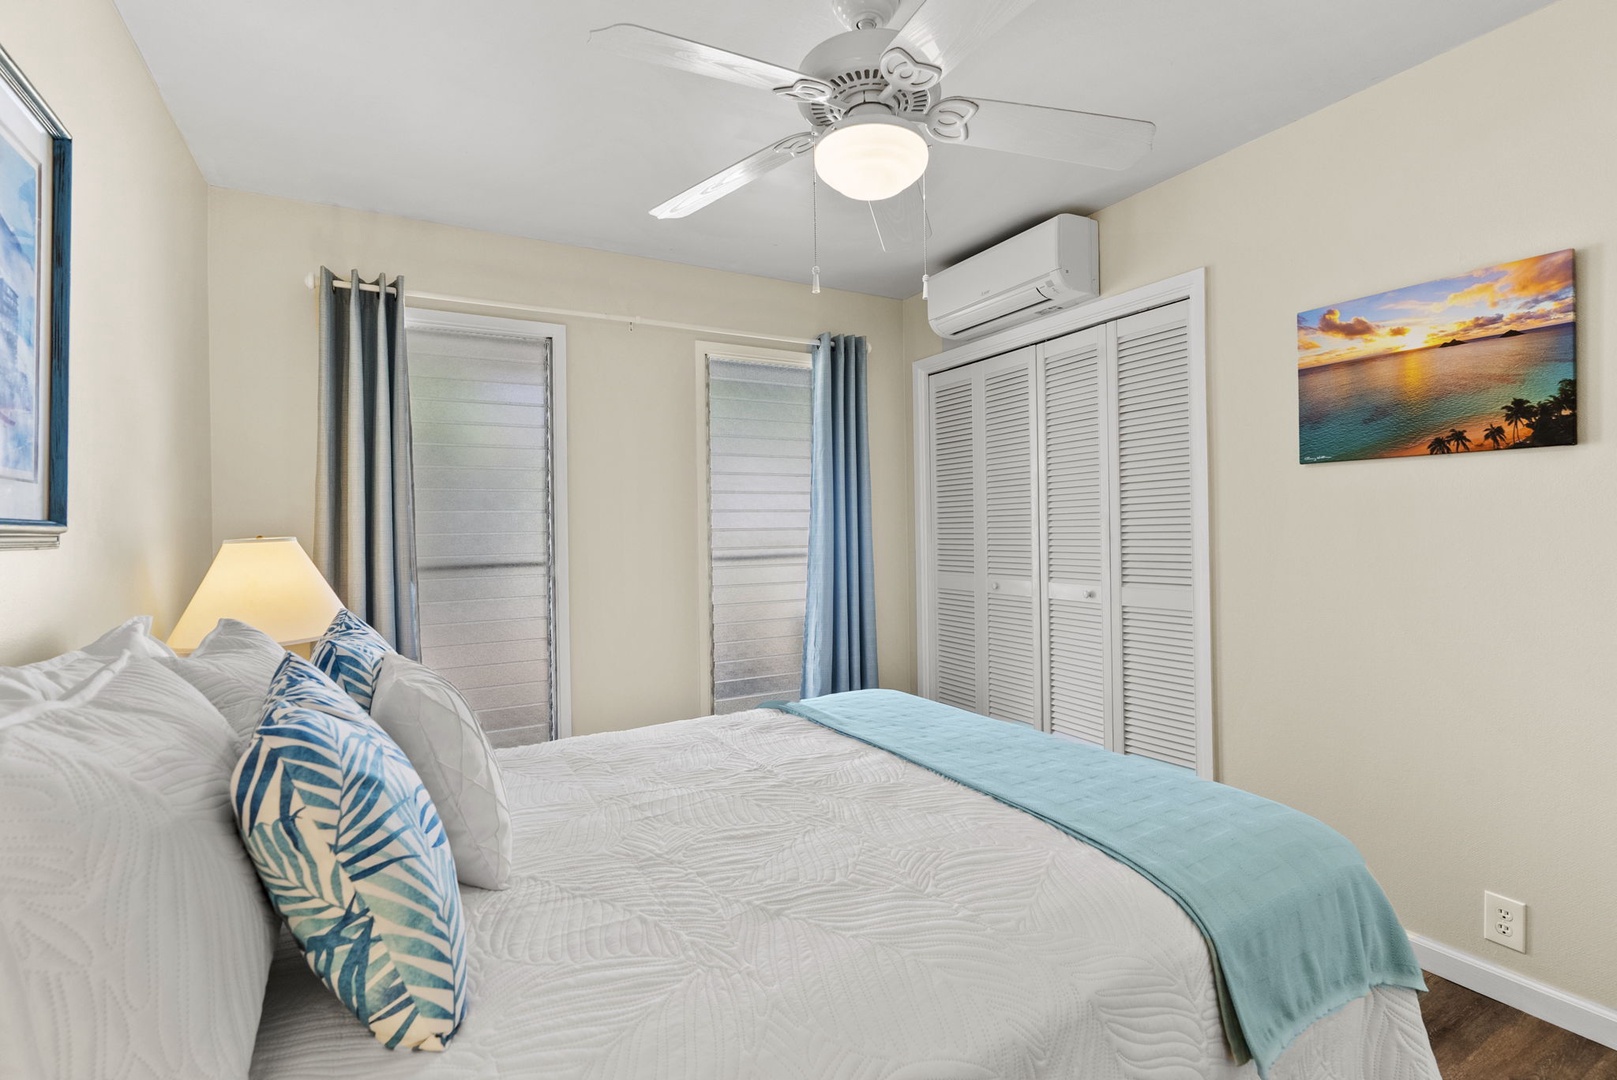 Kailua Vacation Rentals, Hale Aloha - Experience ultimate comfort in the guest suite with AC for a restful slumber.